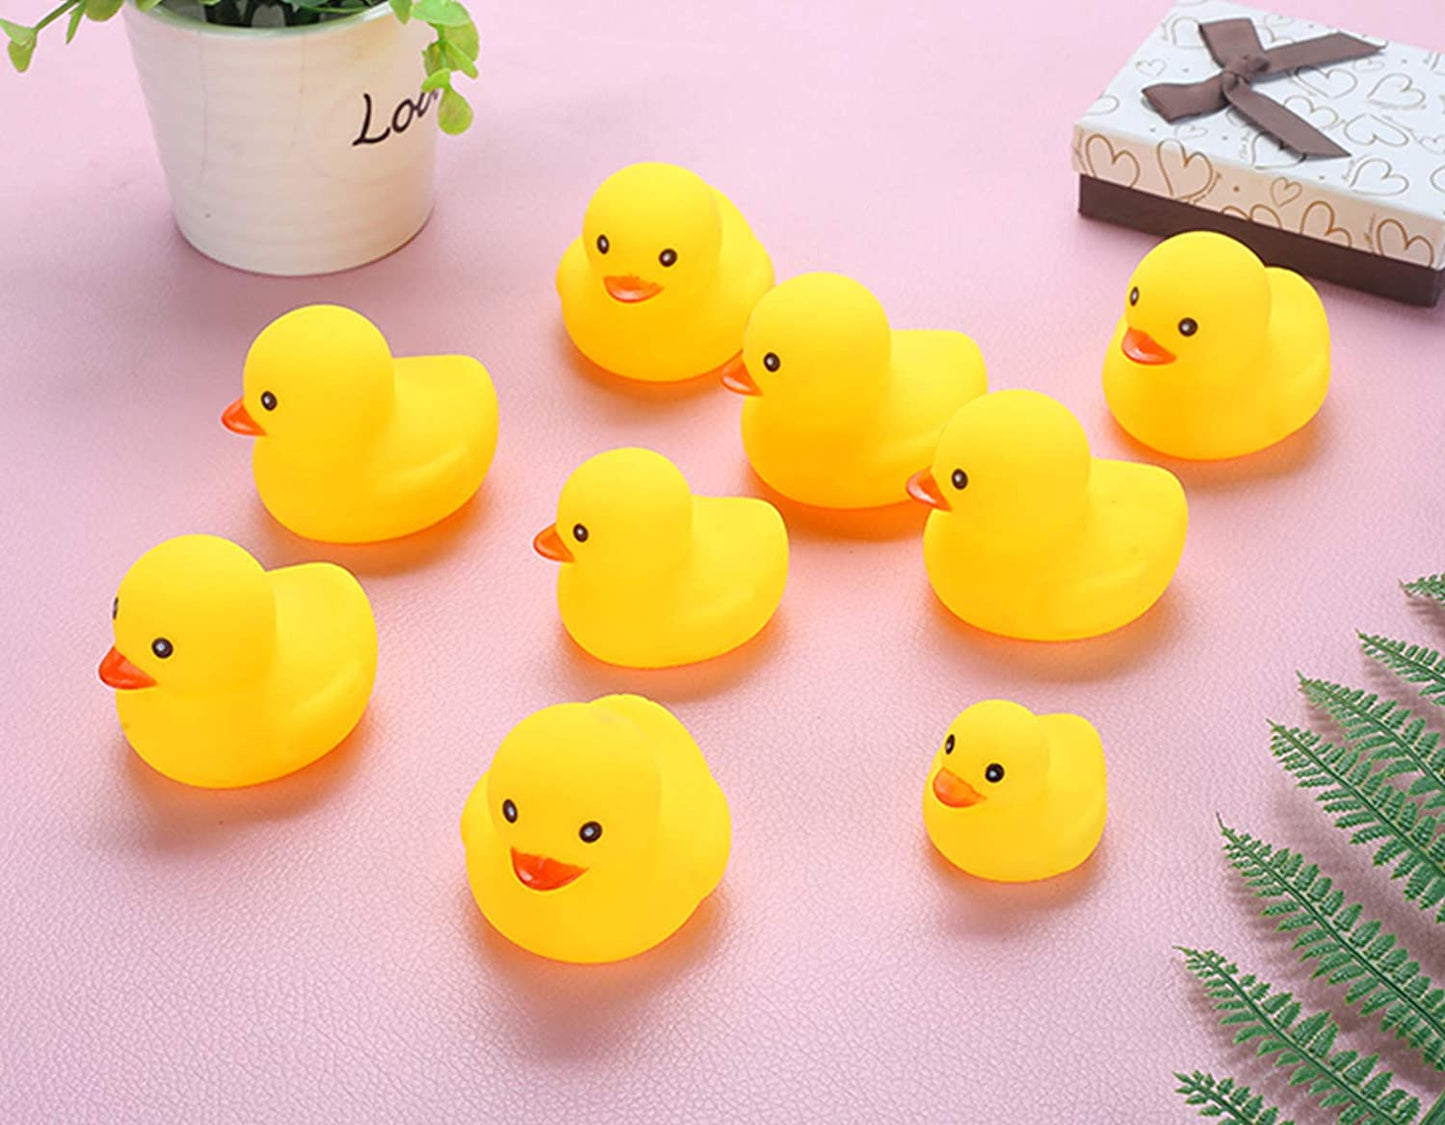 Bath Duck Toys 12PCS Mini Rubber Ducks Squeak and Float Ducks Baby Shower Toy for Toddlers Boys Girls (2.2’’)